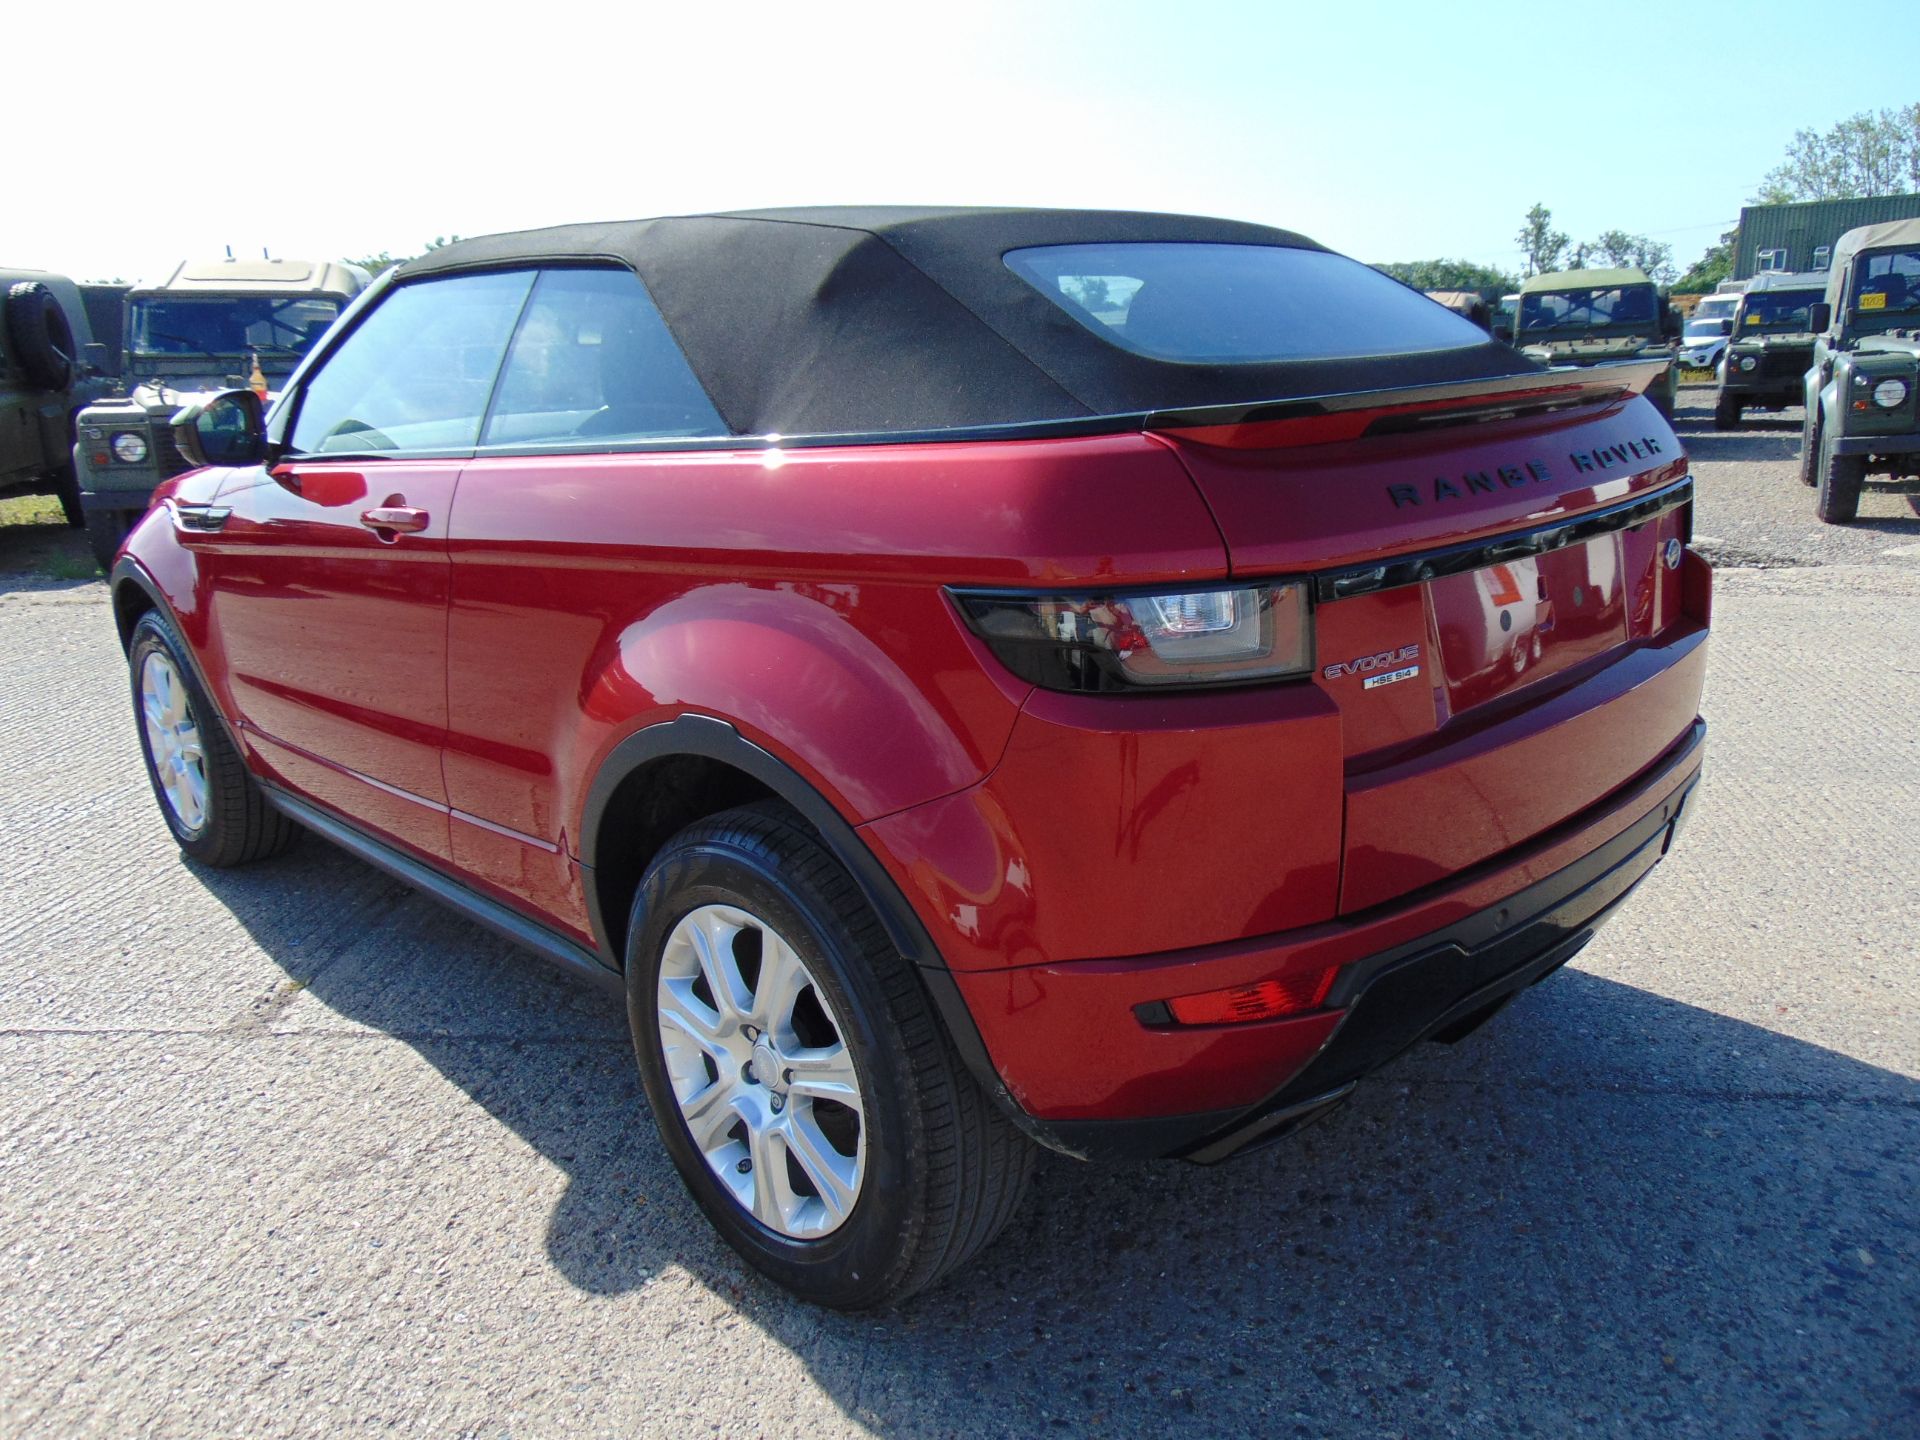 NEW UNUSED Range Rover Evoque 2.0 i4 HSE Dynamic Convertible - Image 15 of 39